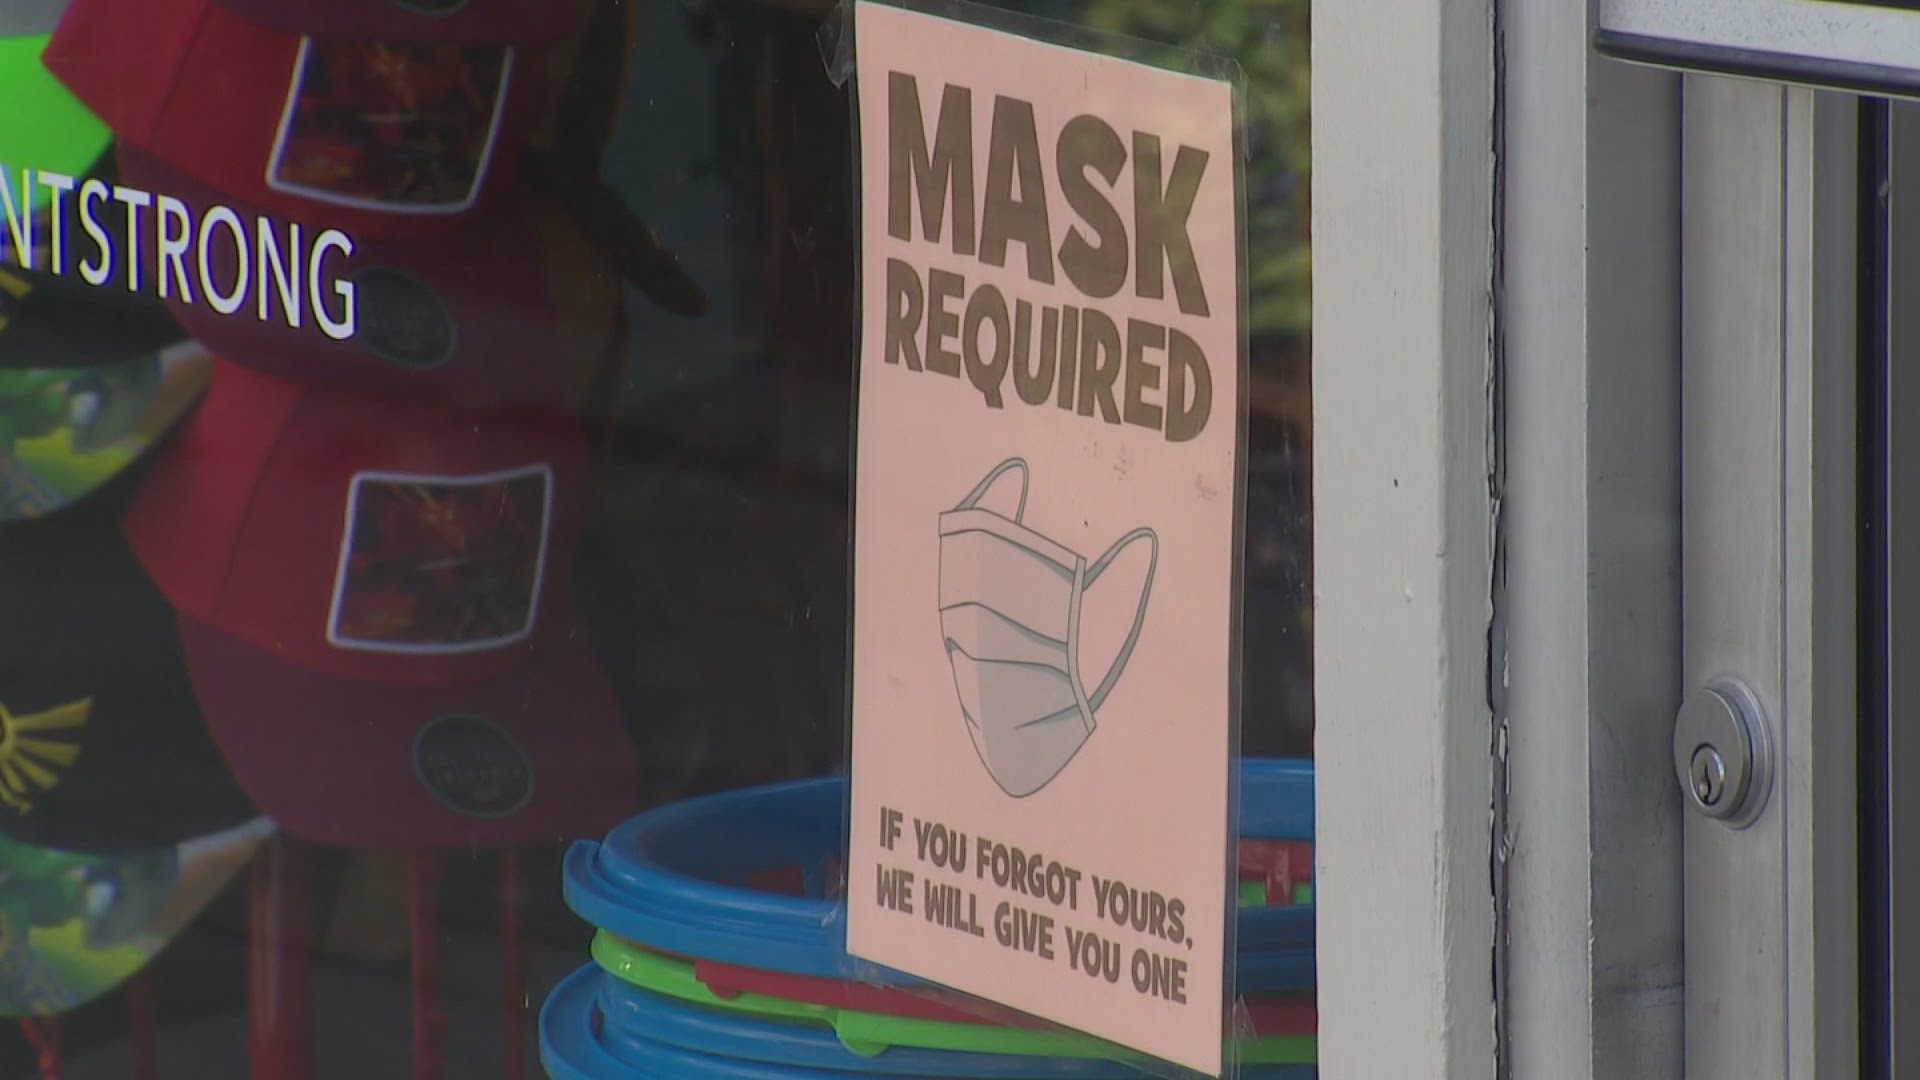 Some business owners in King County say they welcome continuing to require masks be worn indoors, regardless of a person's vaccination status.